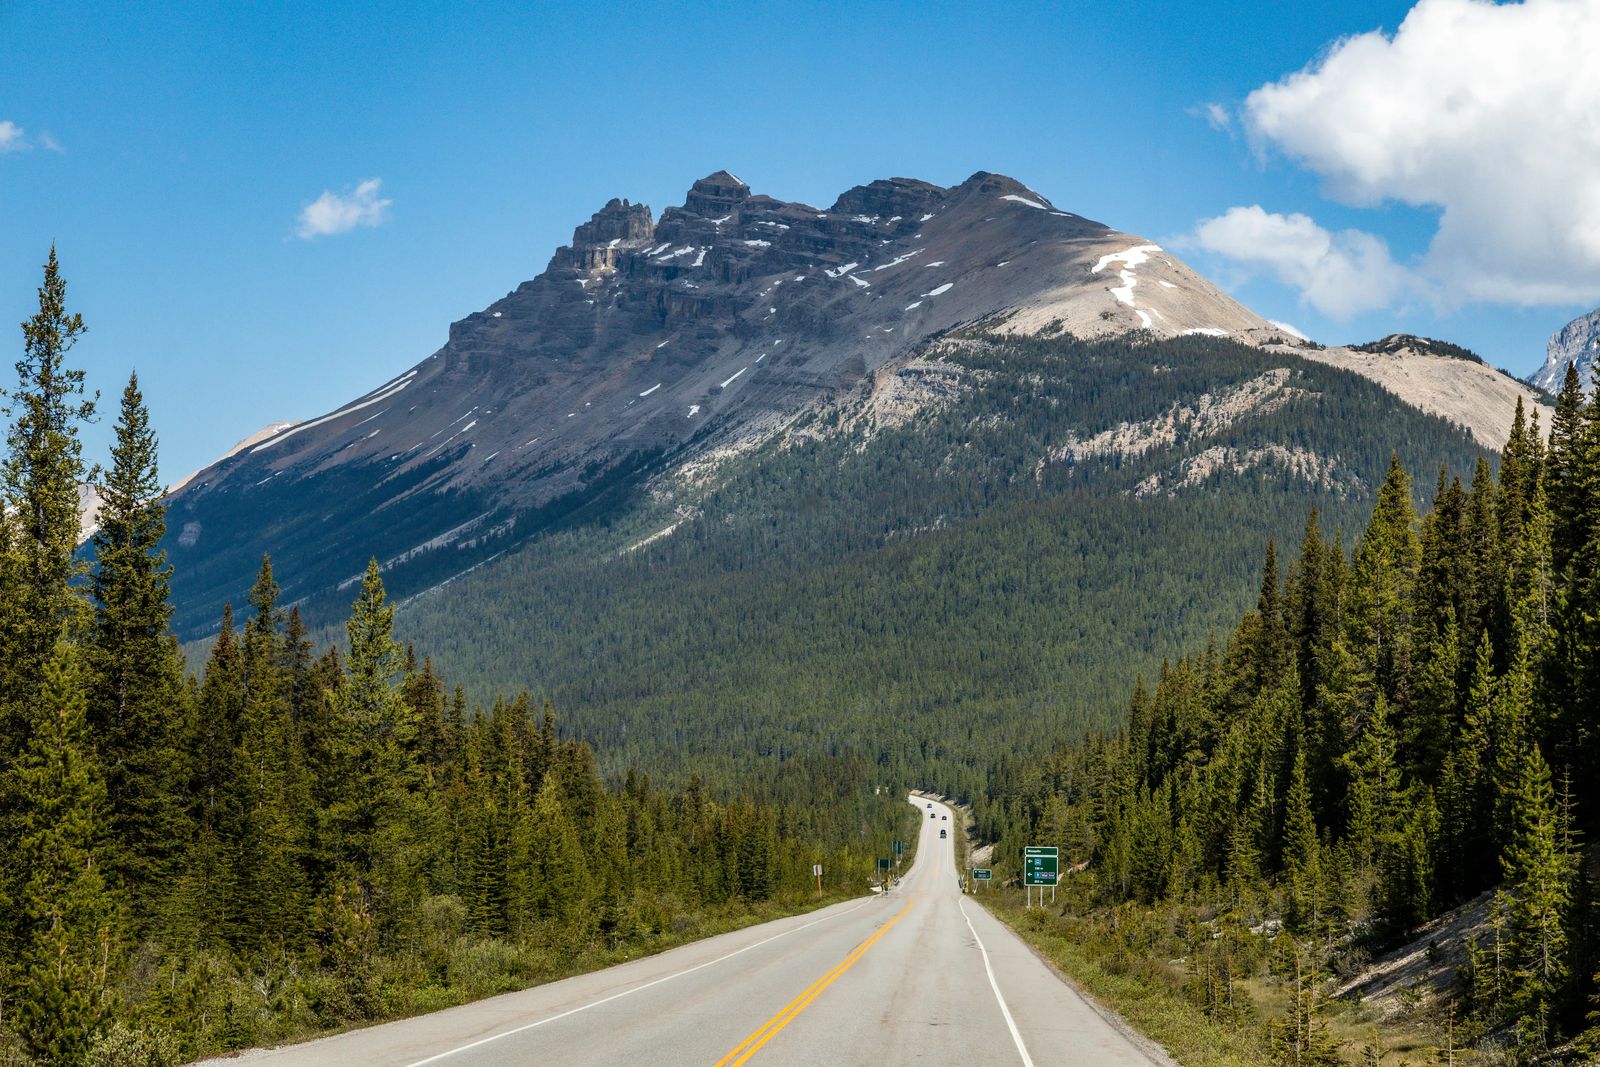 Road leading to the base of some large mountains covered in pine trees - The BEST of the Icefields Parkway Banff